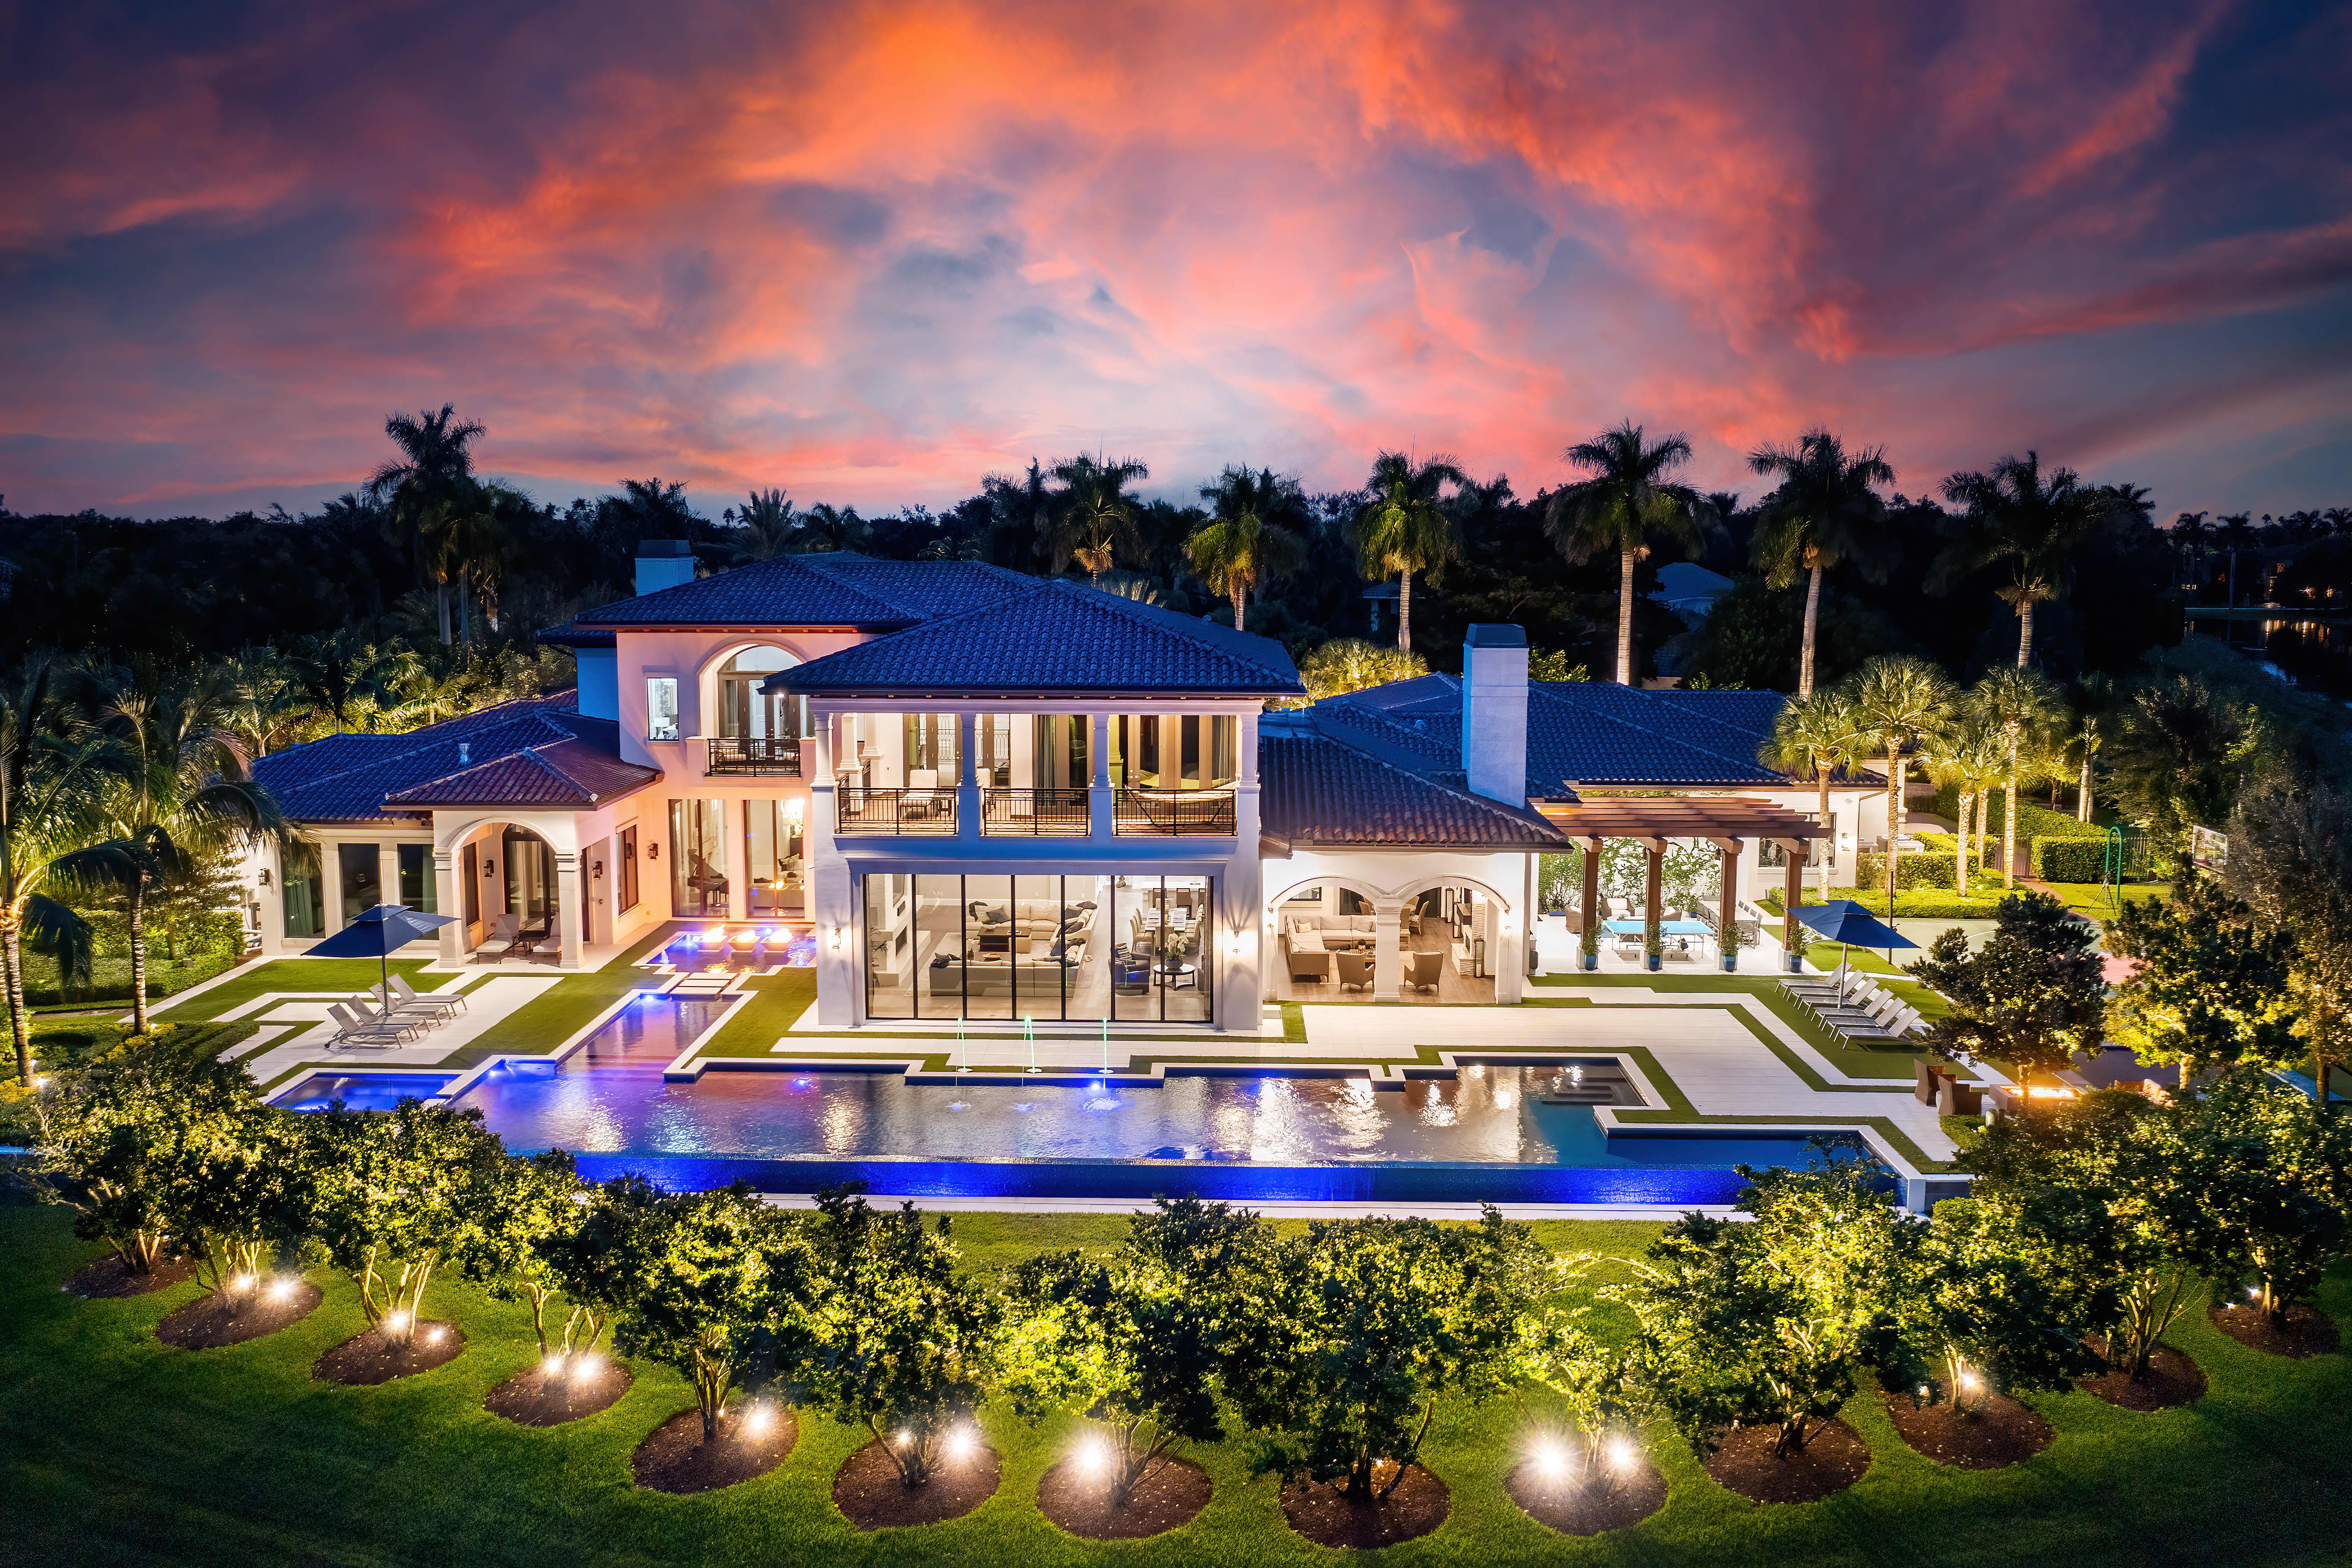 A look into the most expensive house for sale in Weston, Florida